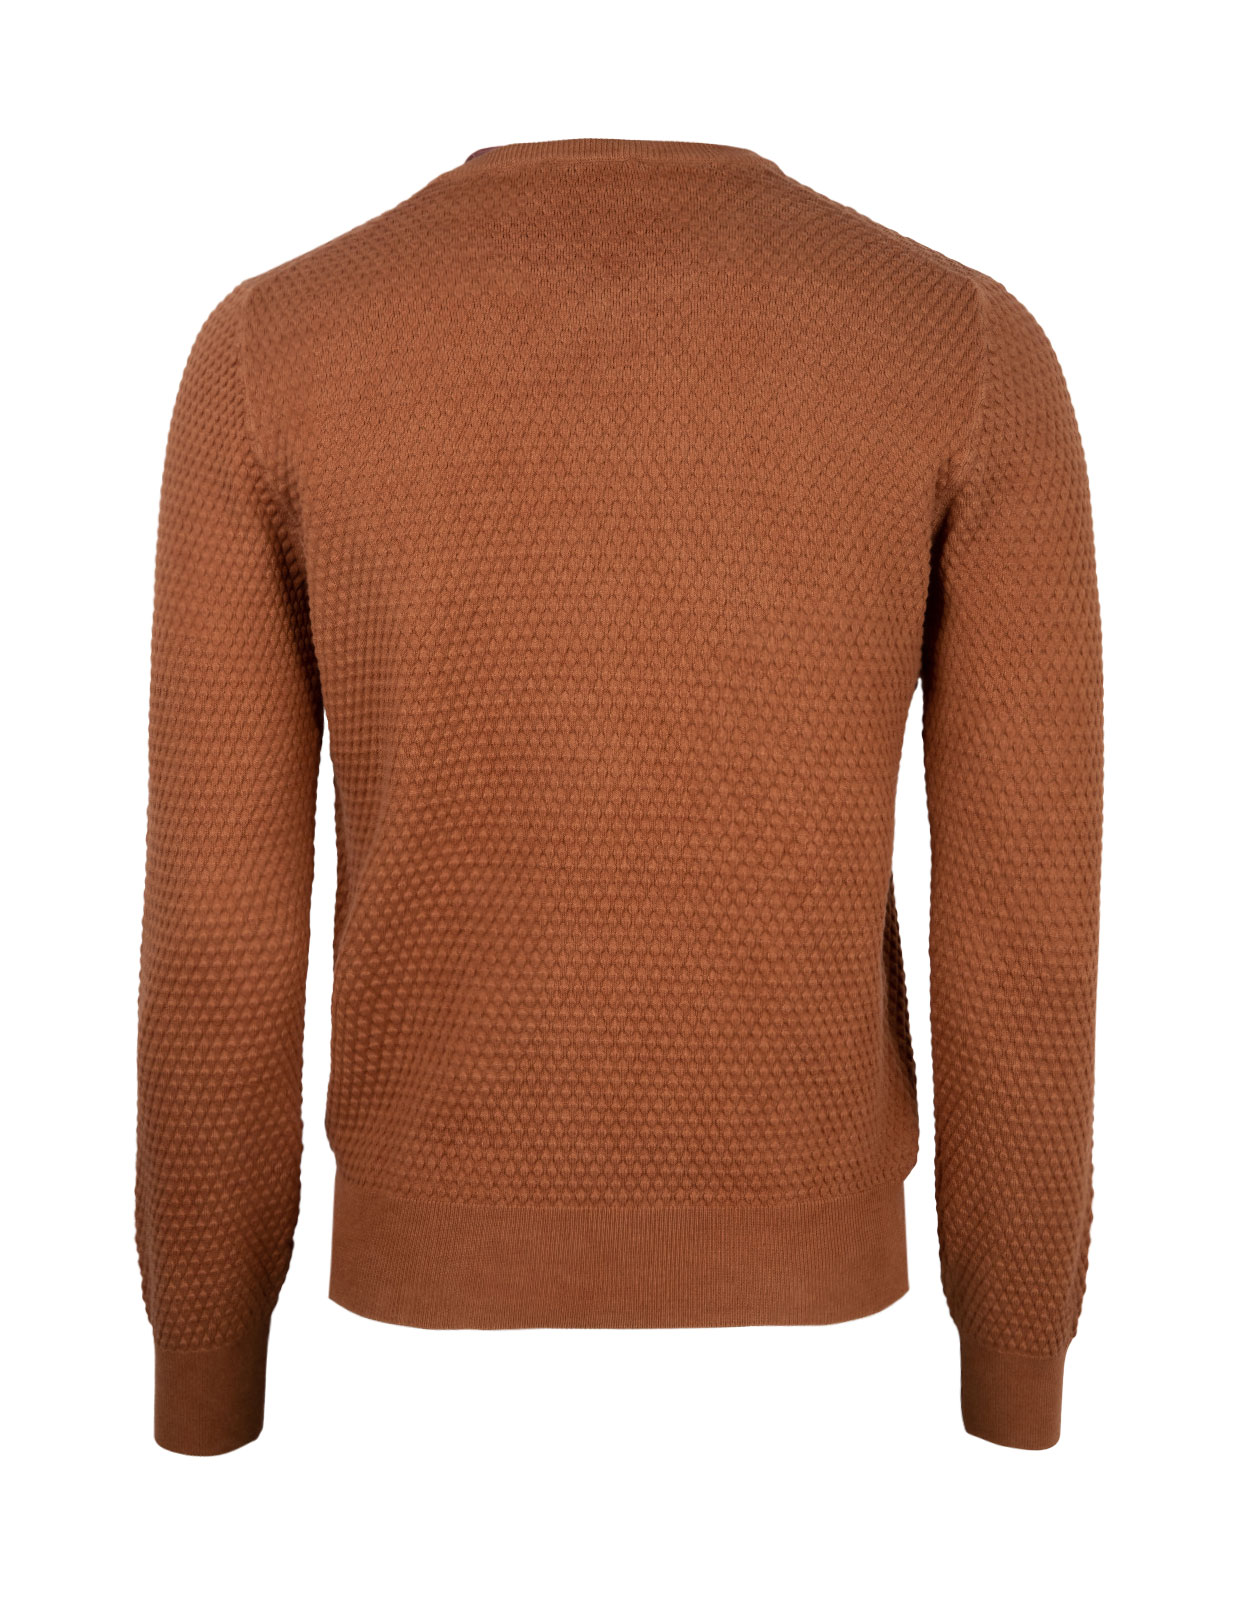 Crew Neck Knitted Texture Cotton Tobacco Stl 54